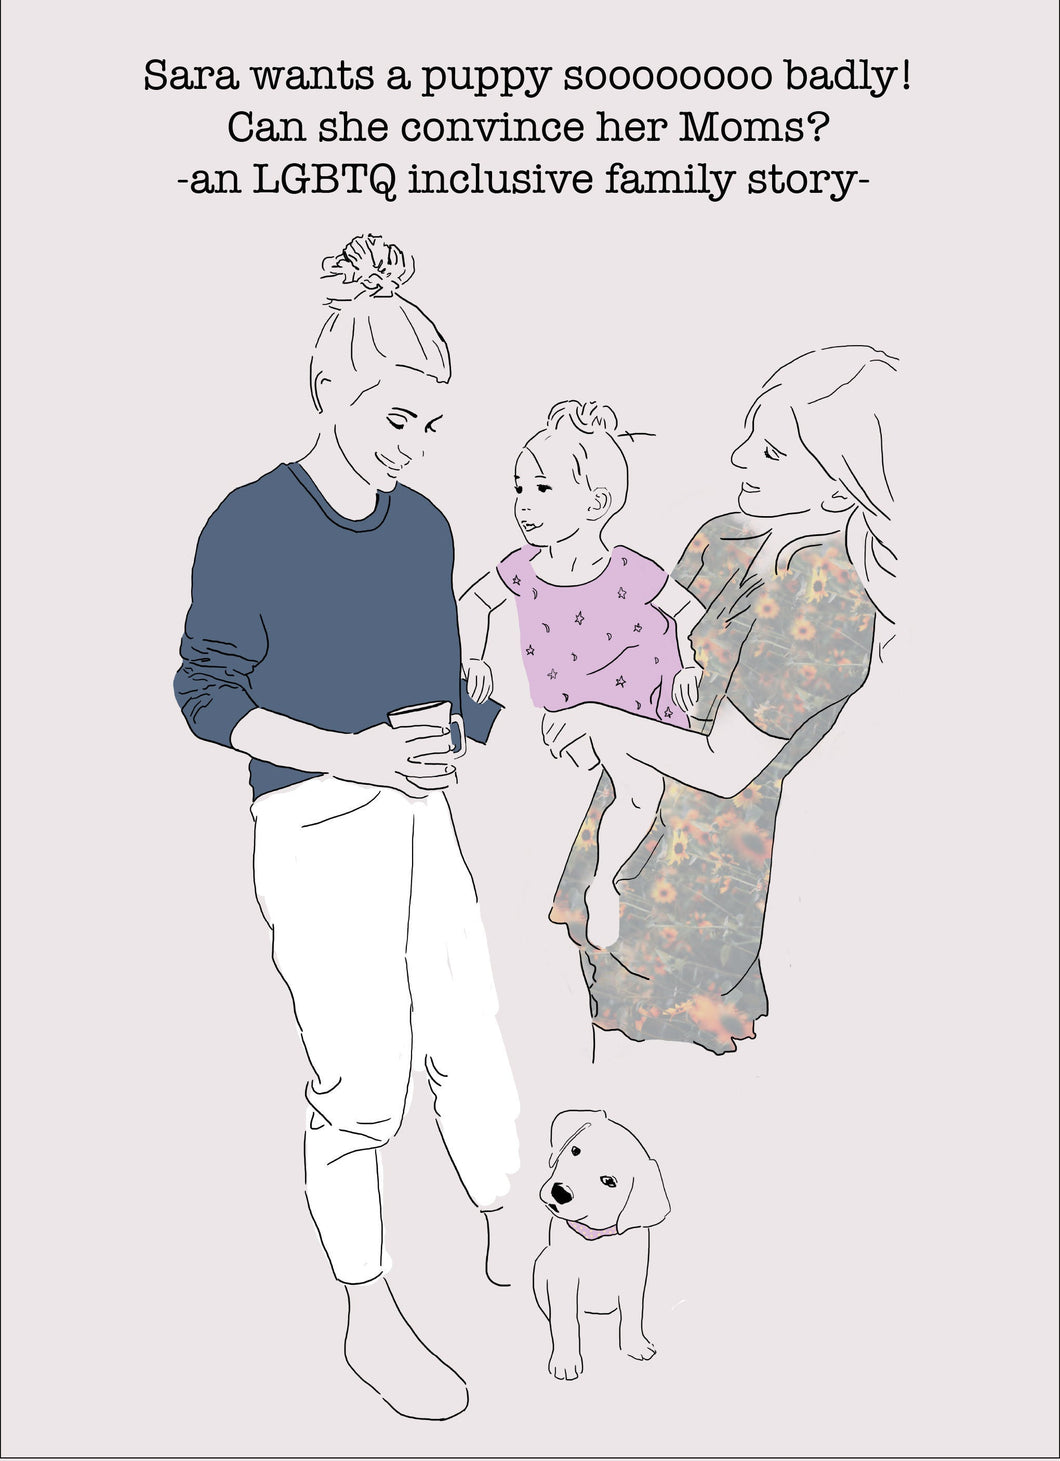 E-BOOK Lesbian Family Book/ebook Lesbian Children's Book PDF Instant Download/Kid Puppy Story/Two Moms/LGBTQ Baby Shower Gay Kids